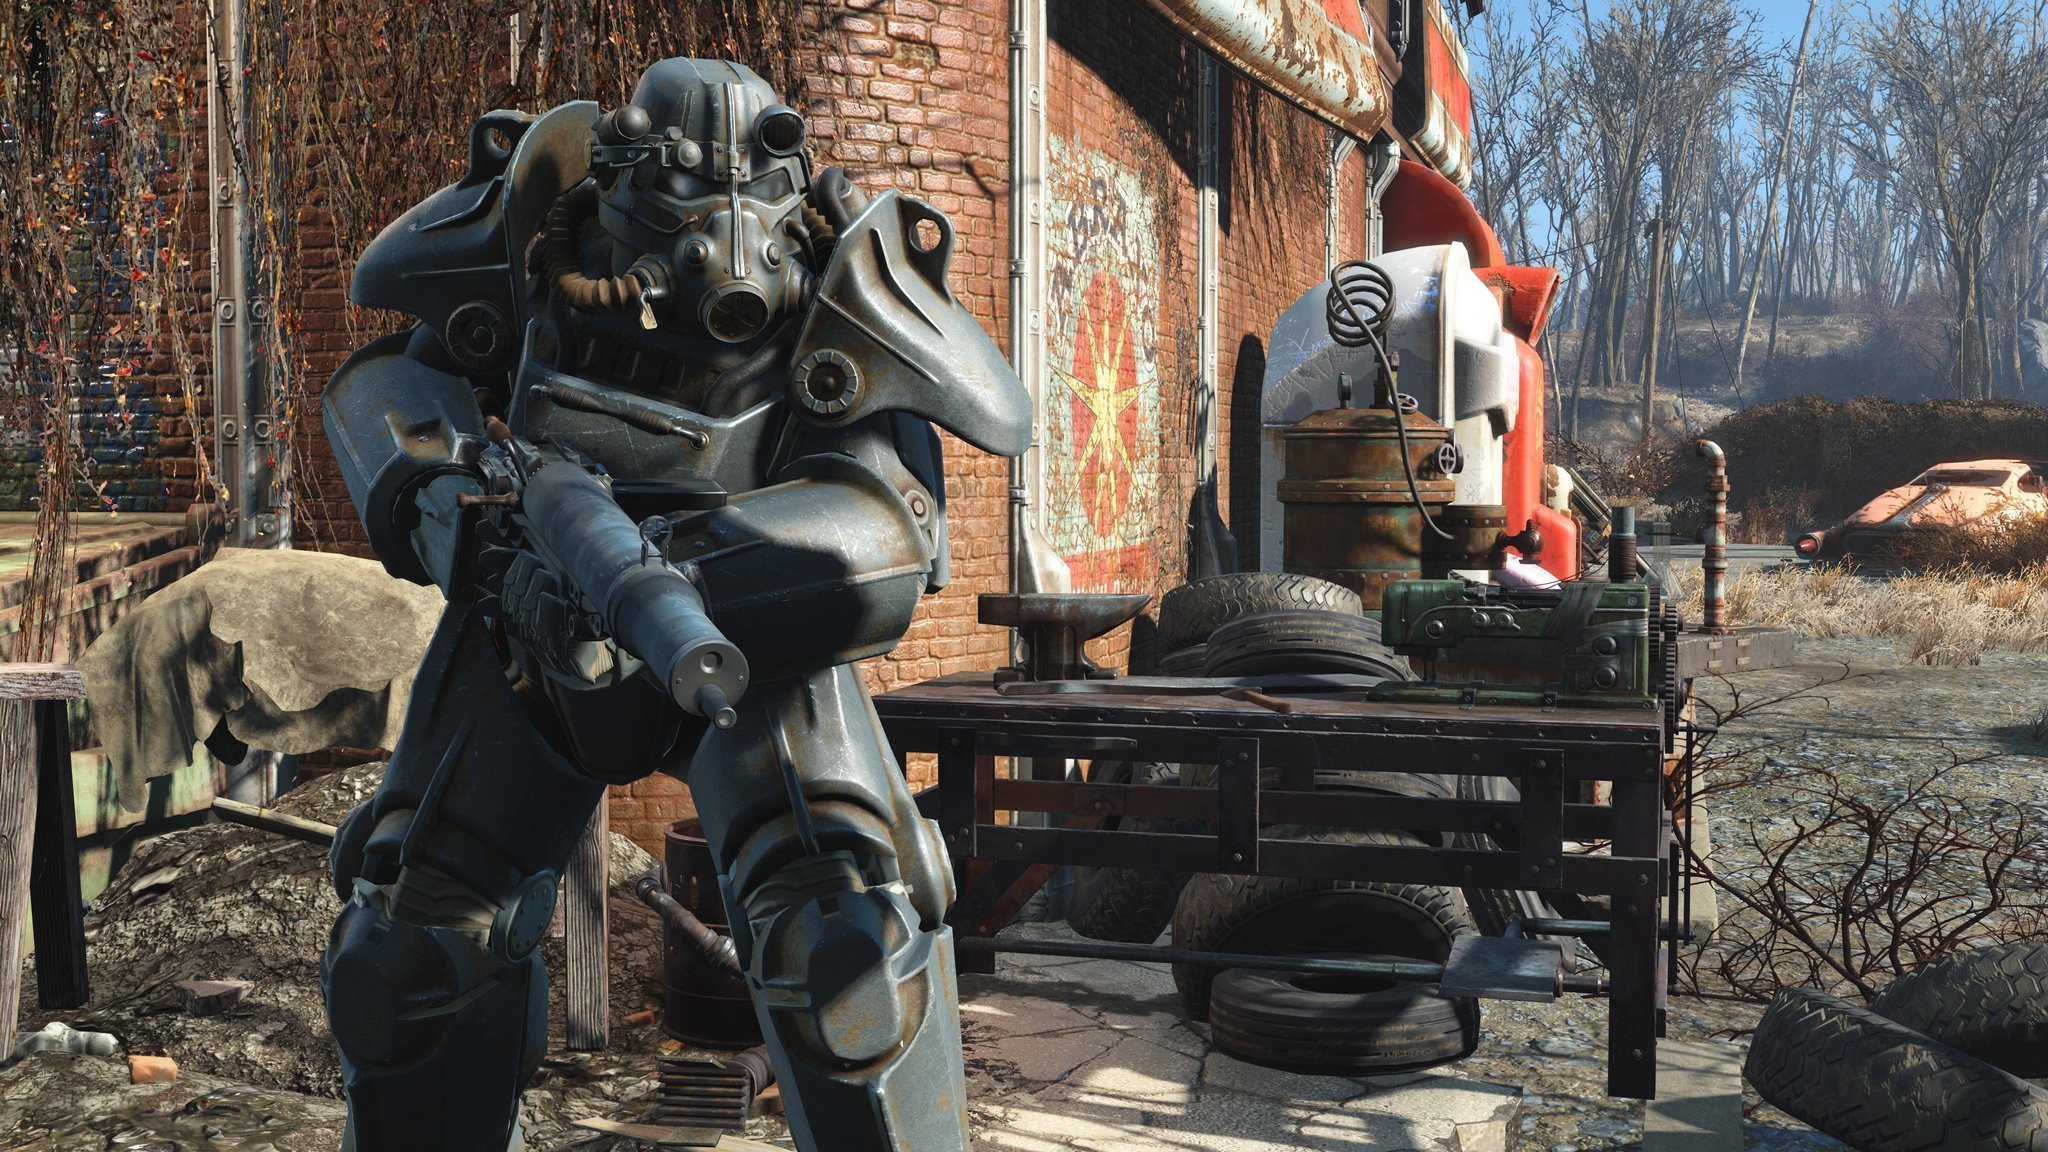 Beroemdheid Mand Vertrek naar Here are the best Fallout 4 Xbox One mods you must try | Windows Central